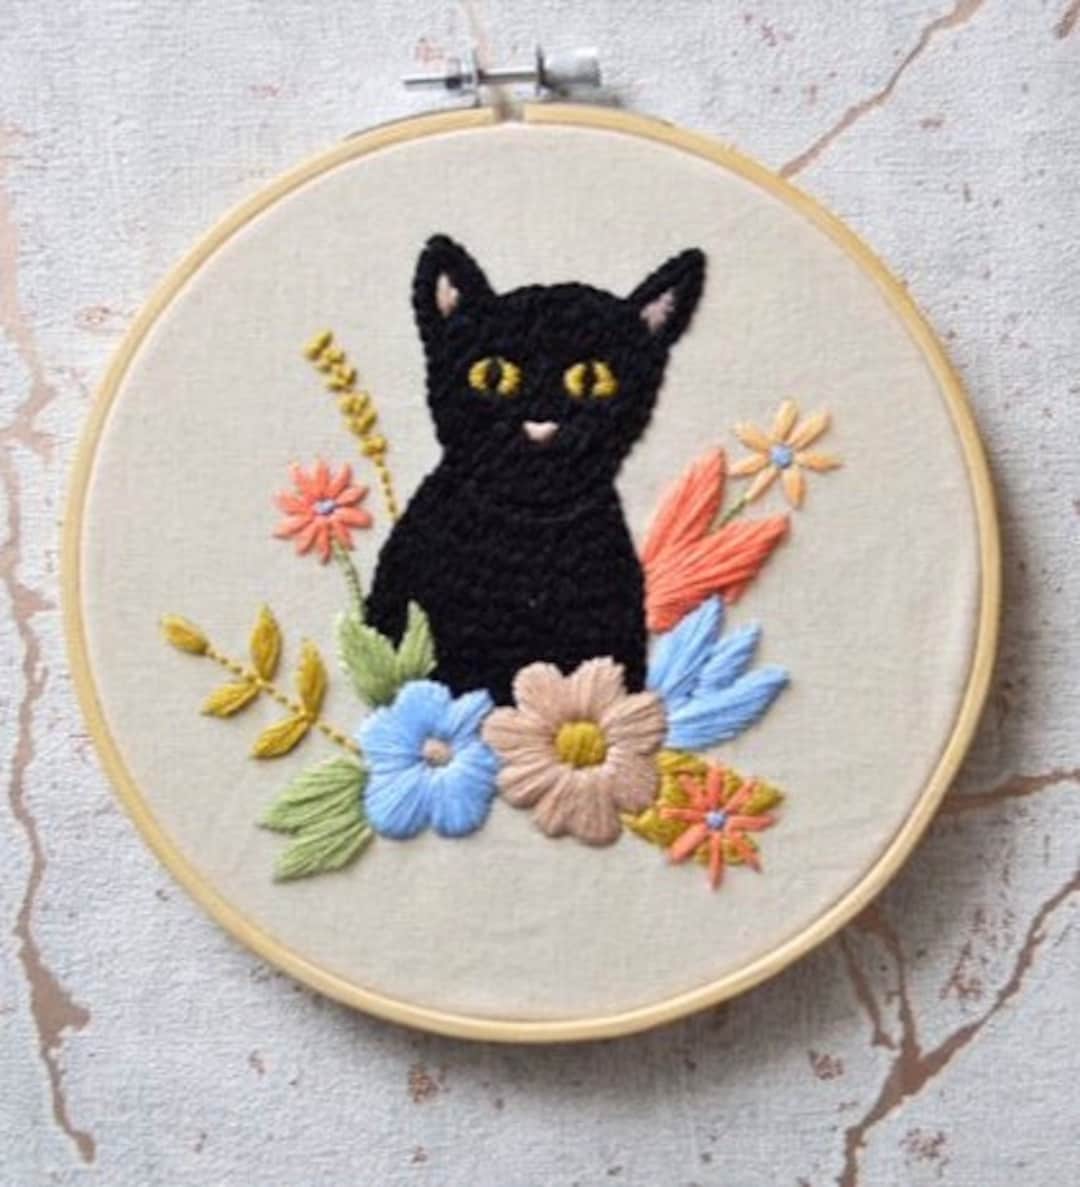 Wholesale Black Cat Embroidery Kit for your store - Faire